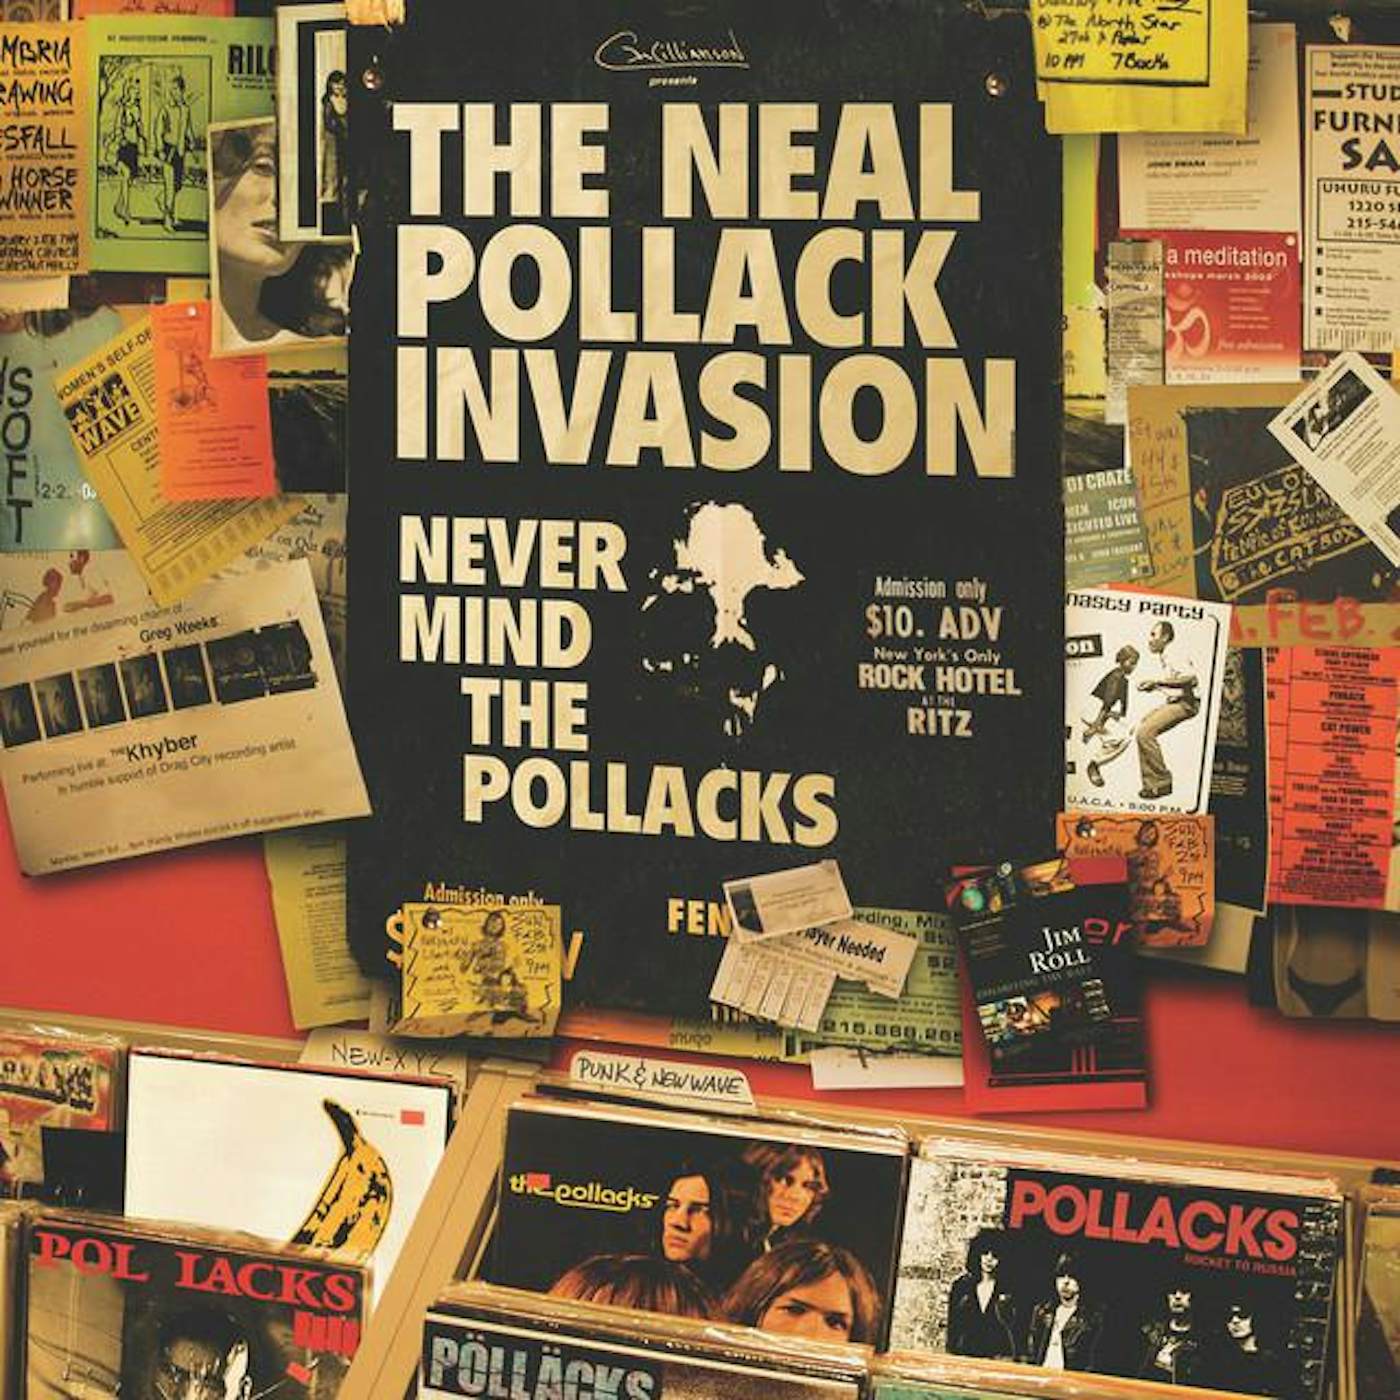 The Neal Pollack Invasion